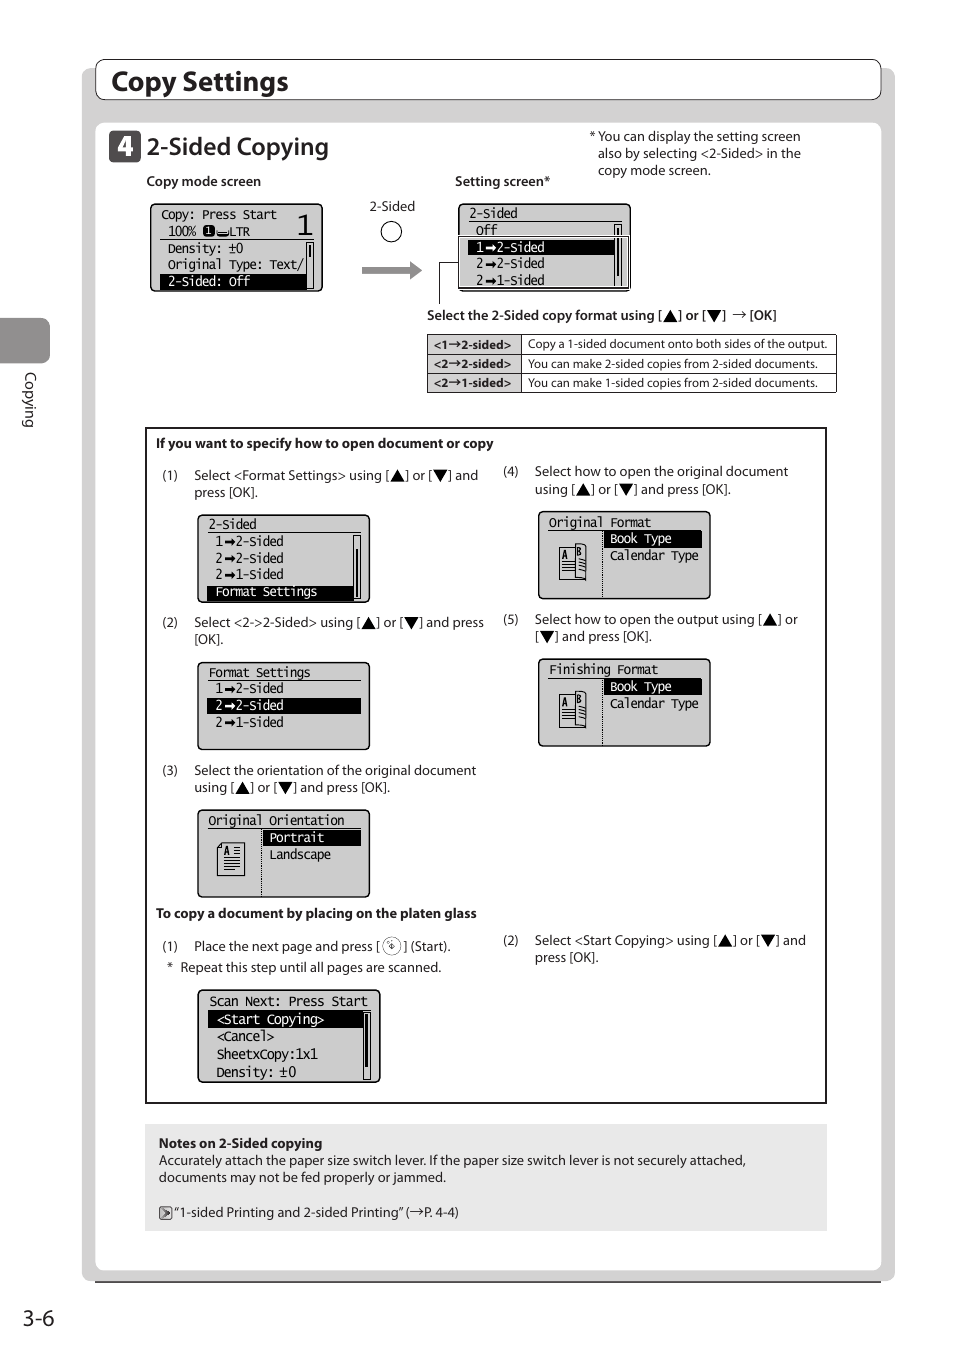 Copy settings, Sided copying | Canon imageCLASS D1350 User Manual | Page 60 / 174